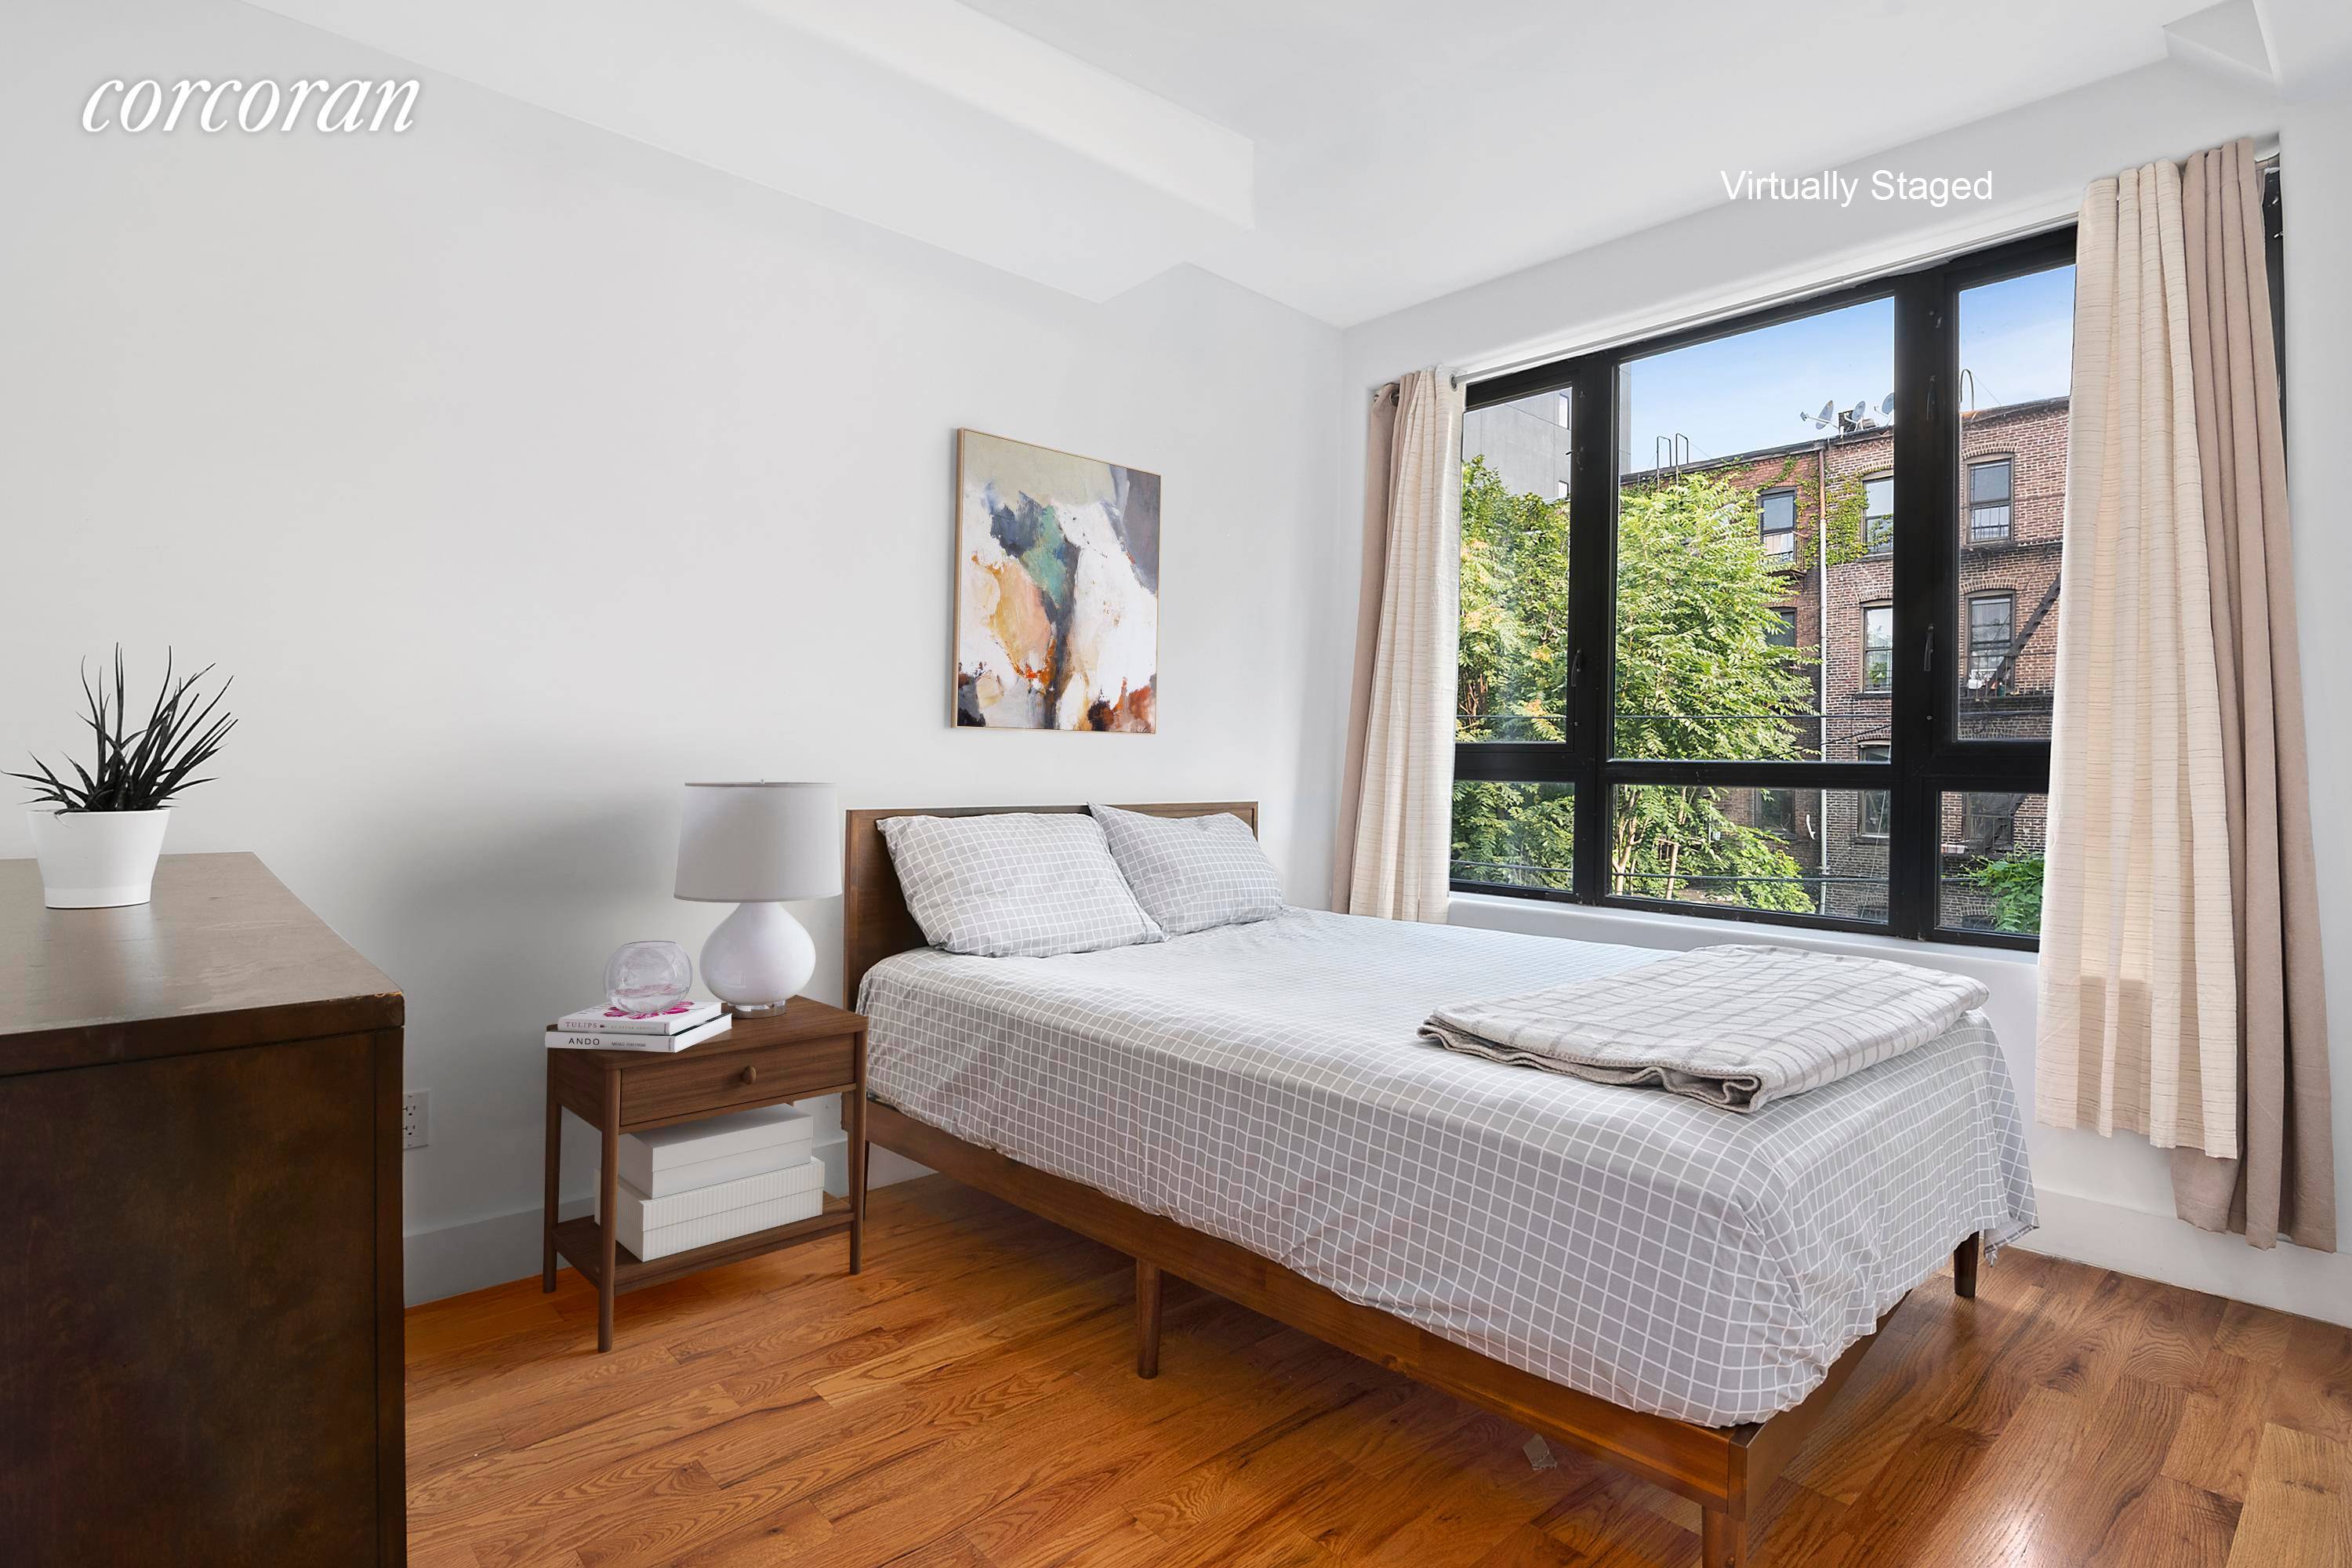 Beautiful one bedroom condominium with modern finishes on the border of Crown Heights and Bed Stuy, two of BrooklynA s hottest neighborhoods.